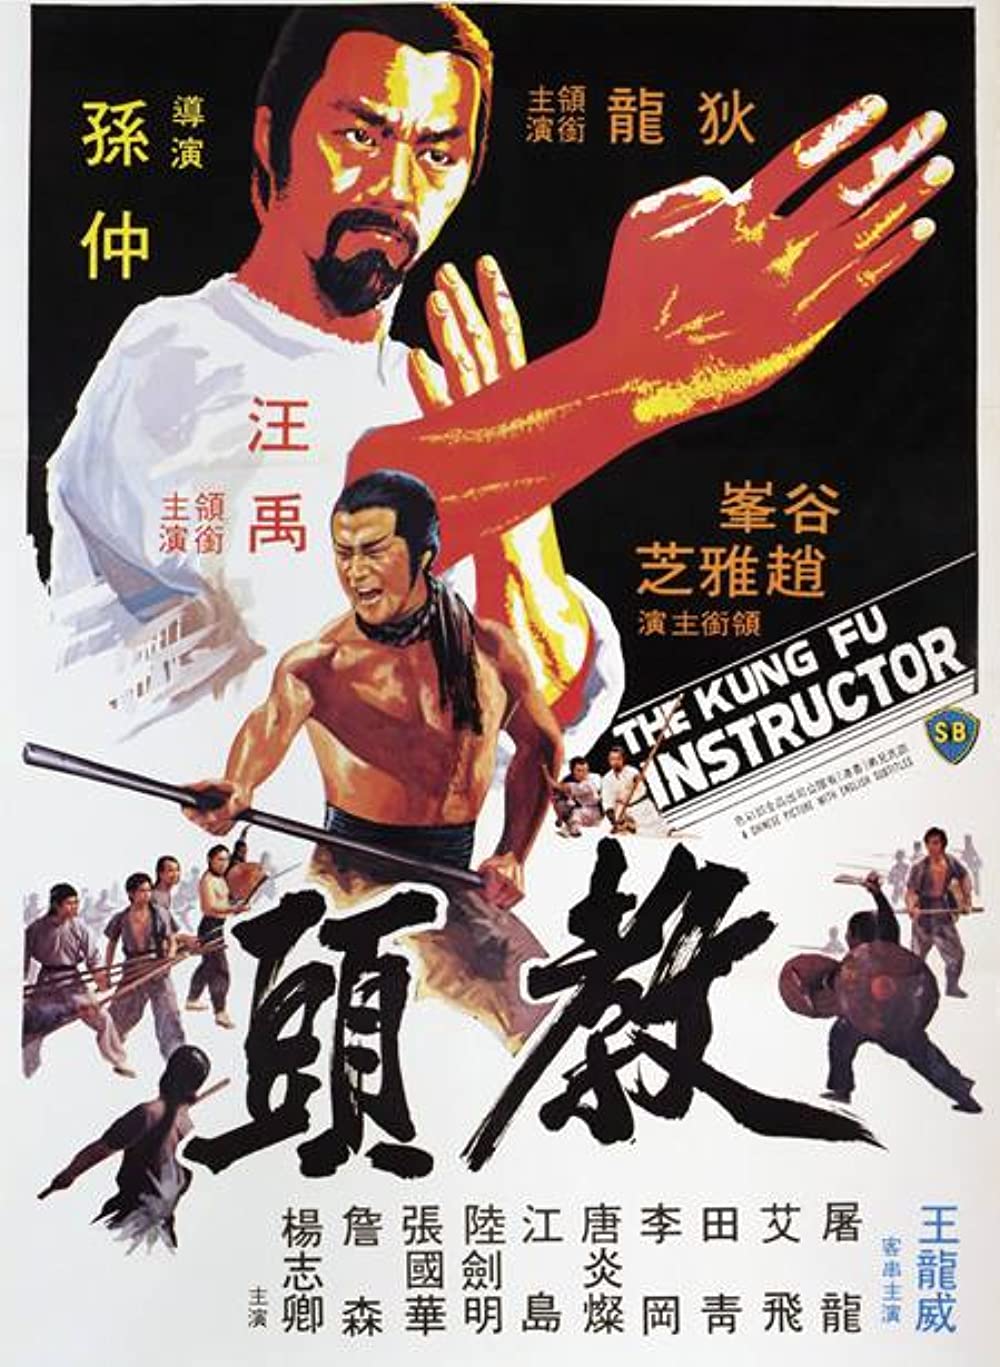 The Kung Fu Instructor (1979)